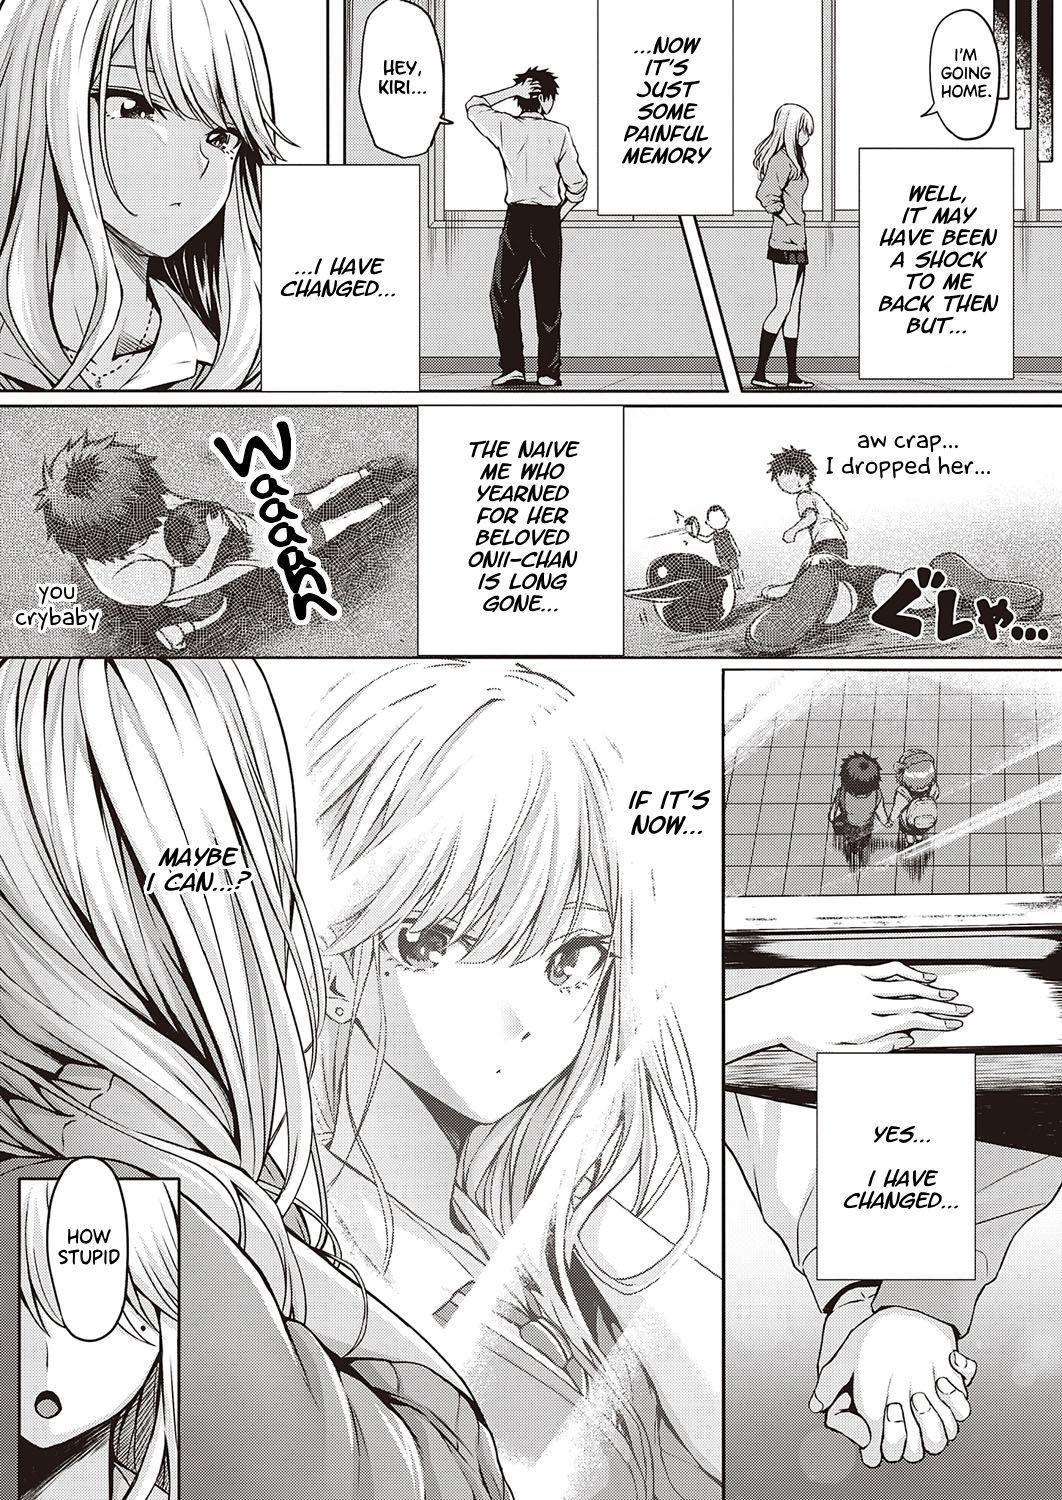 Jacking Off Re:Hatsukoi | Re:First Love Hardcorend - Page 3